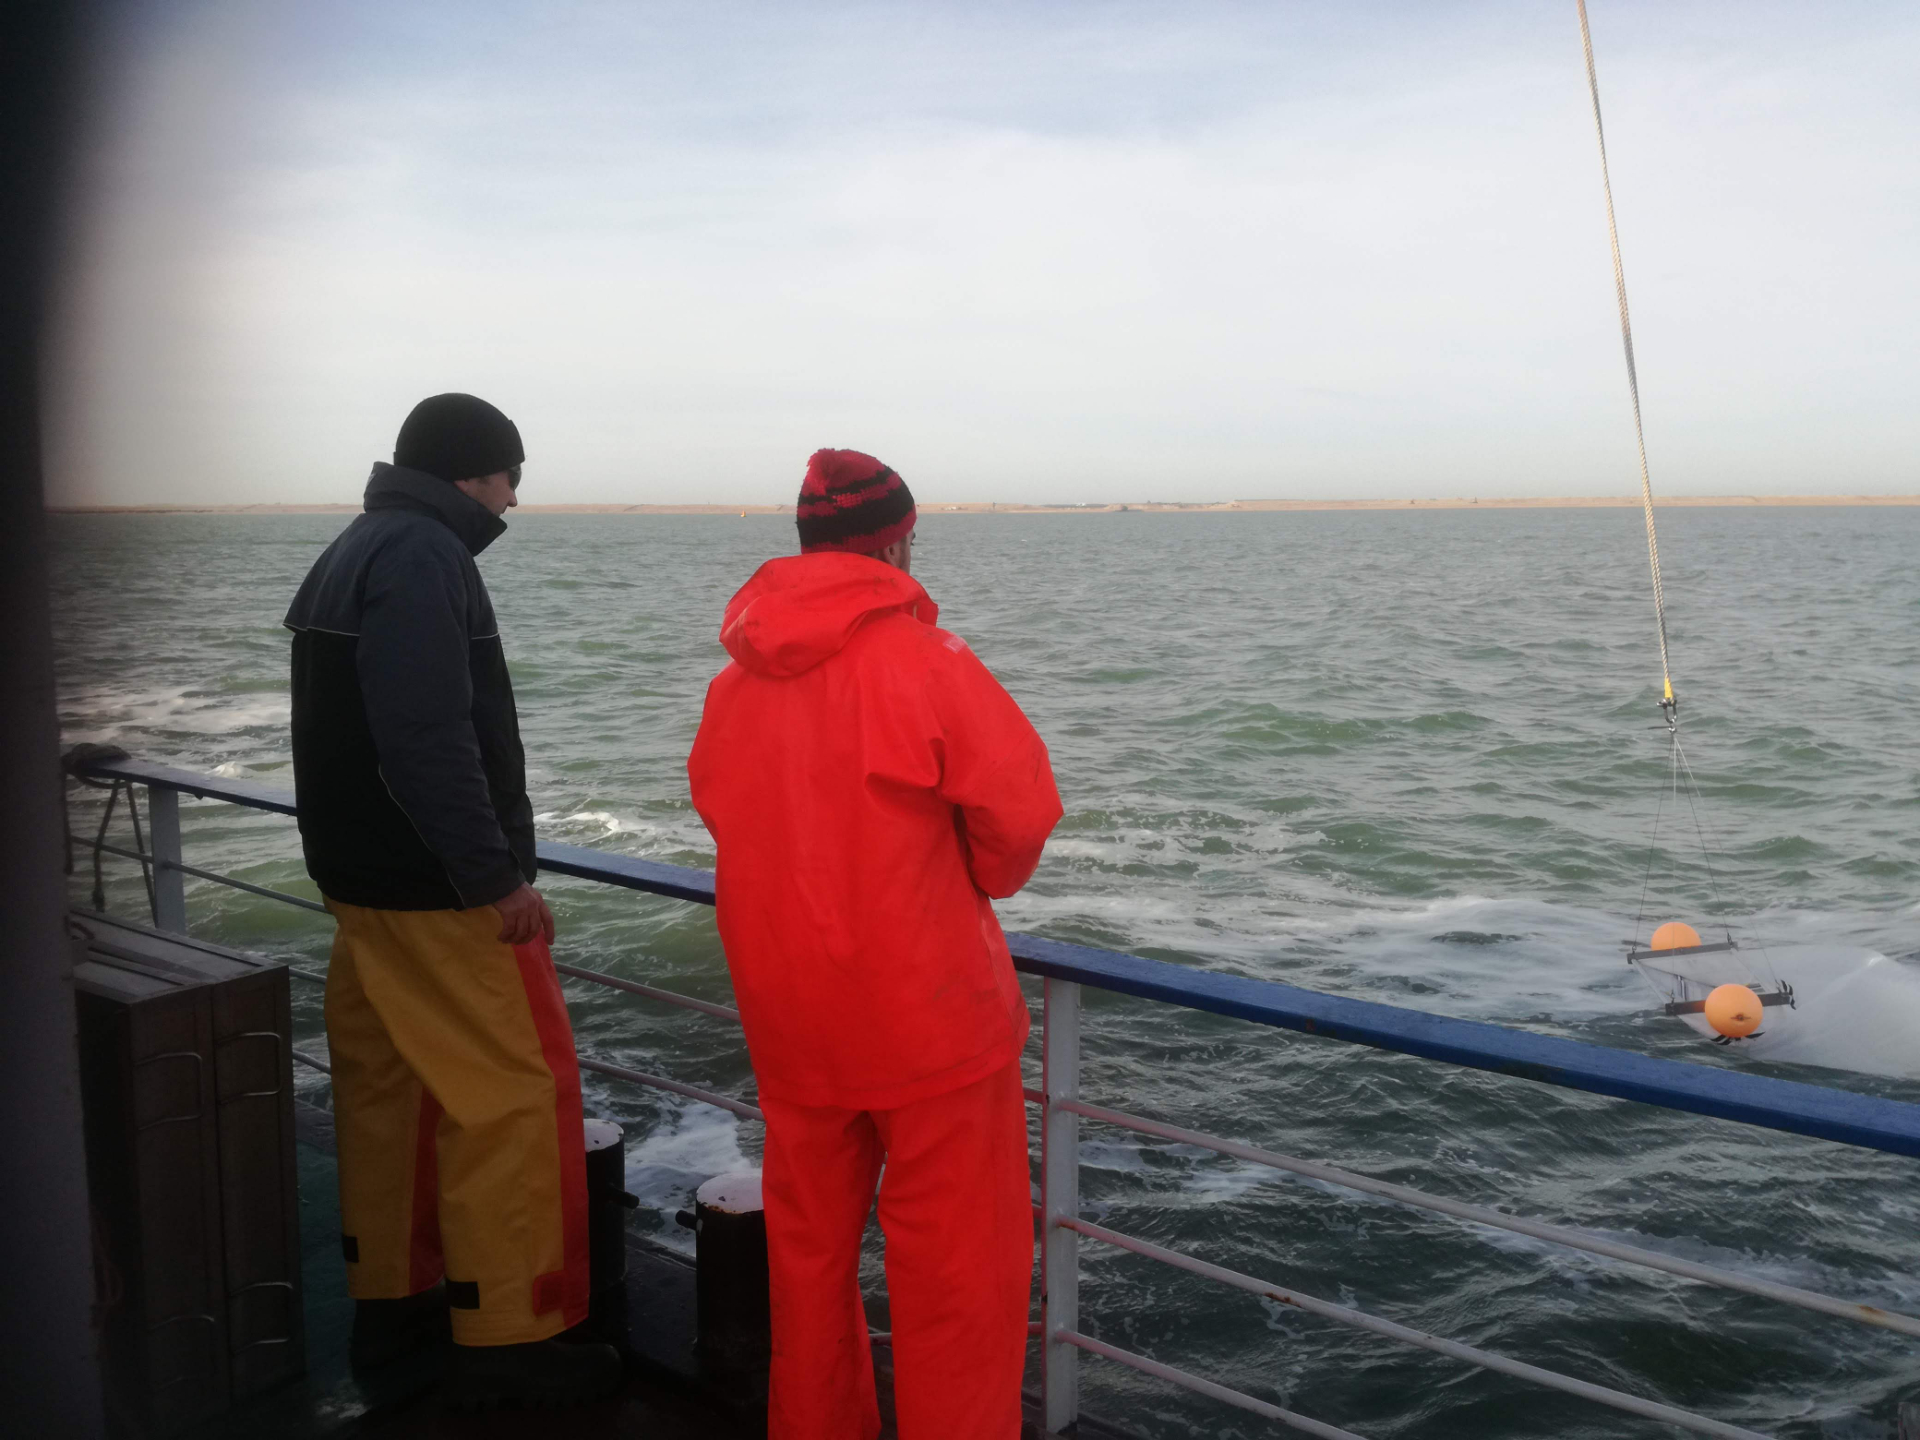 Colleagues collecting microplastics with a plankton net